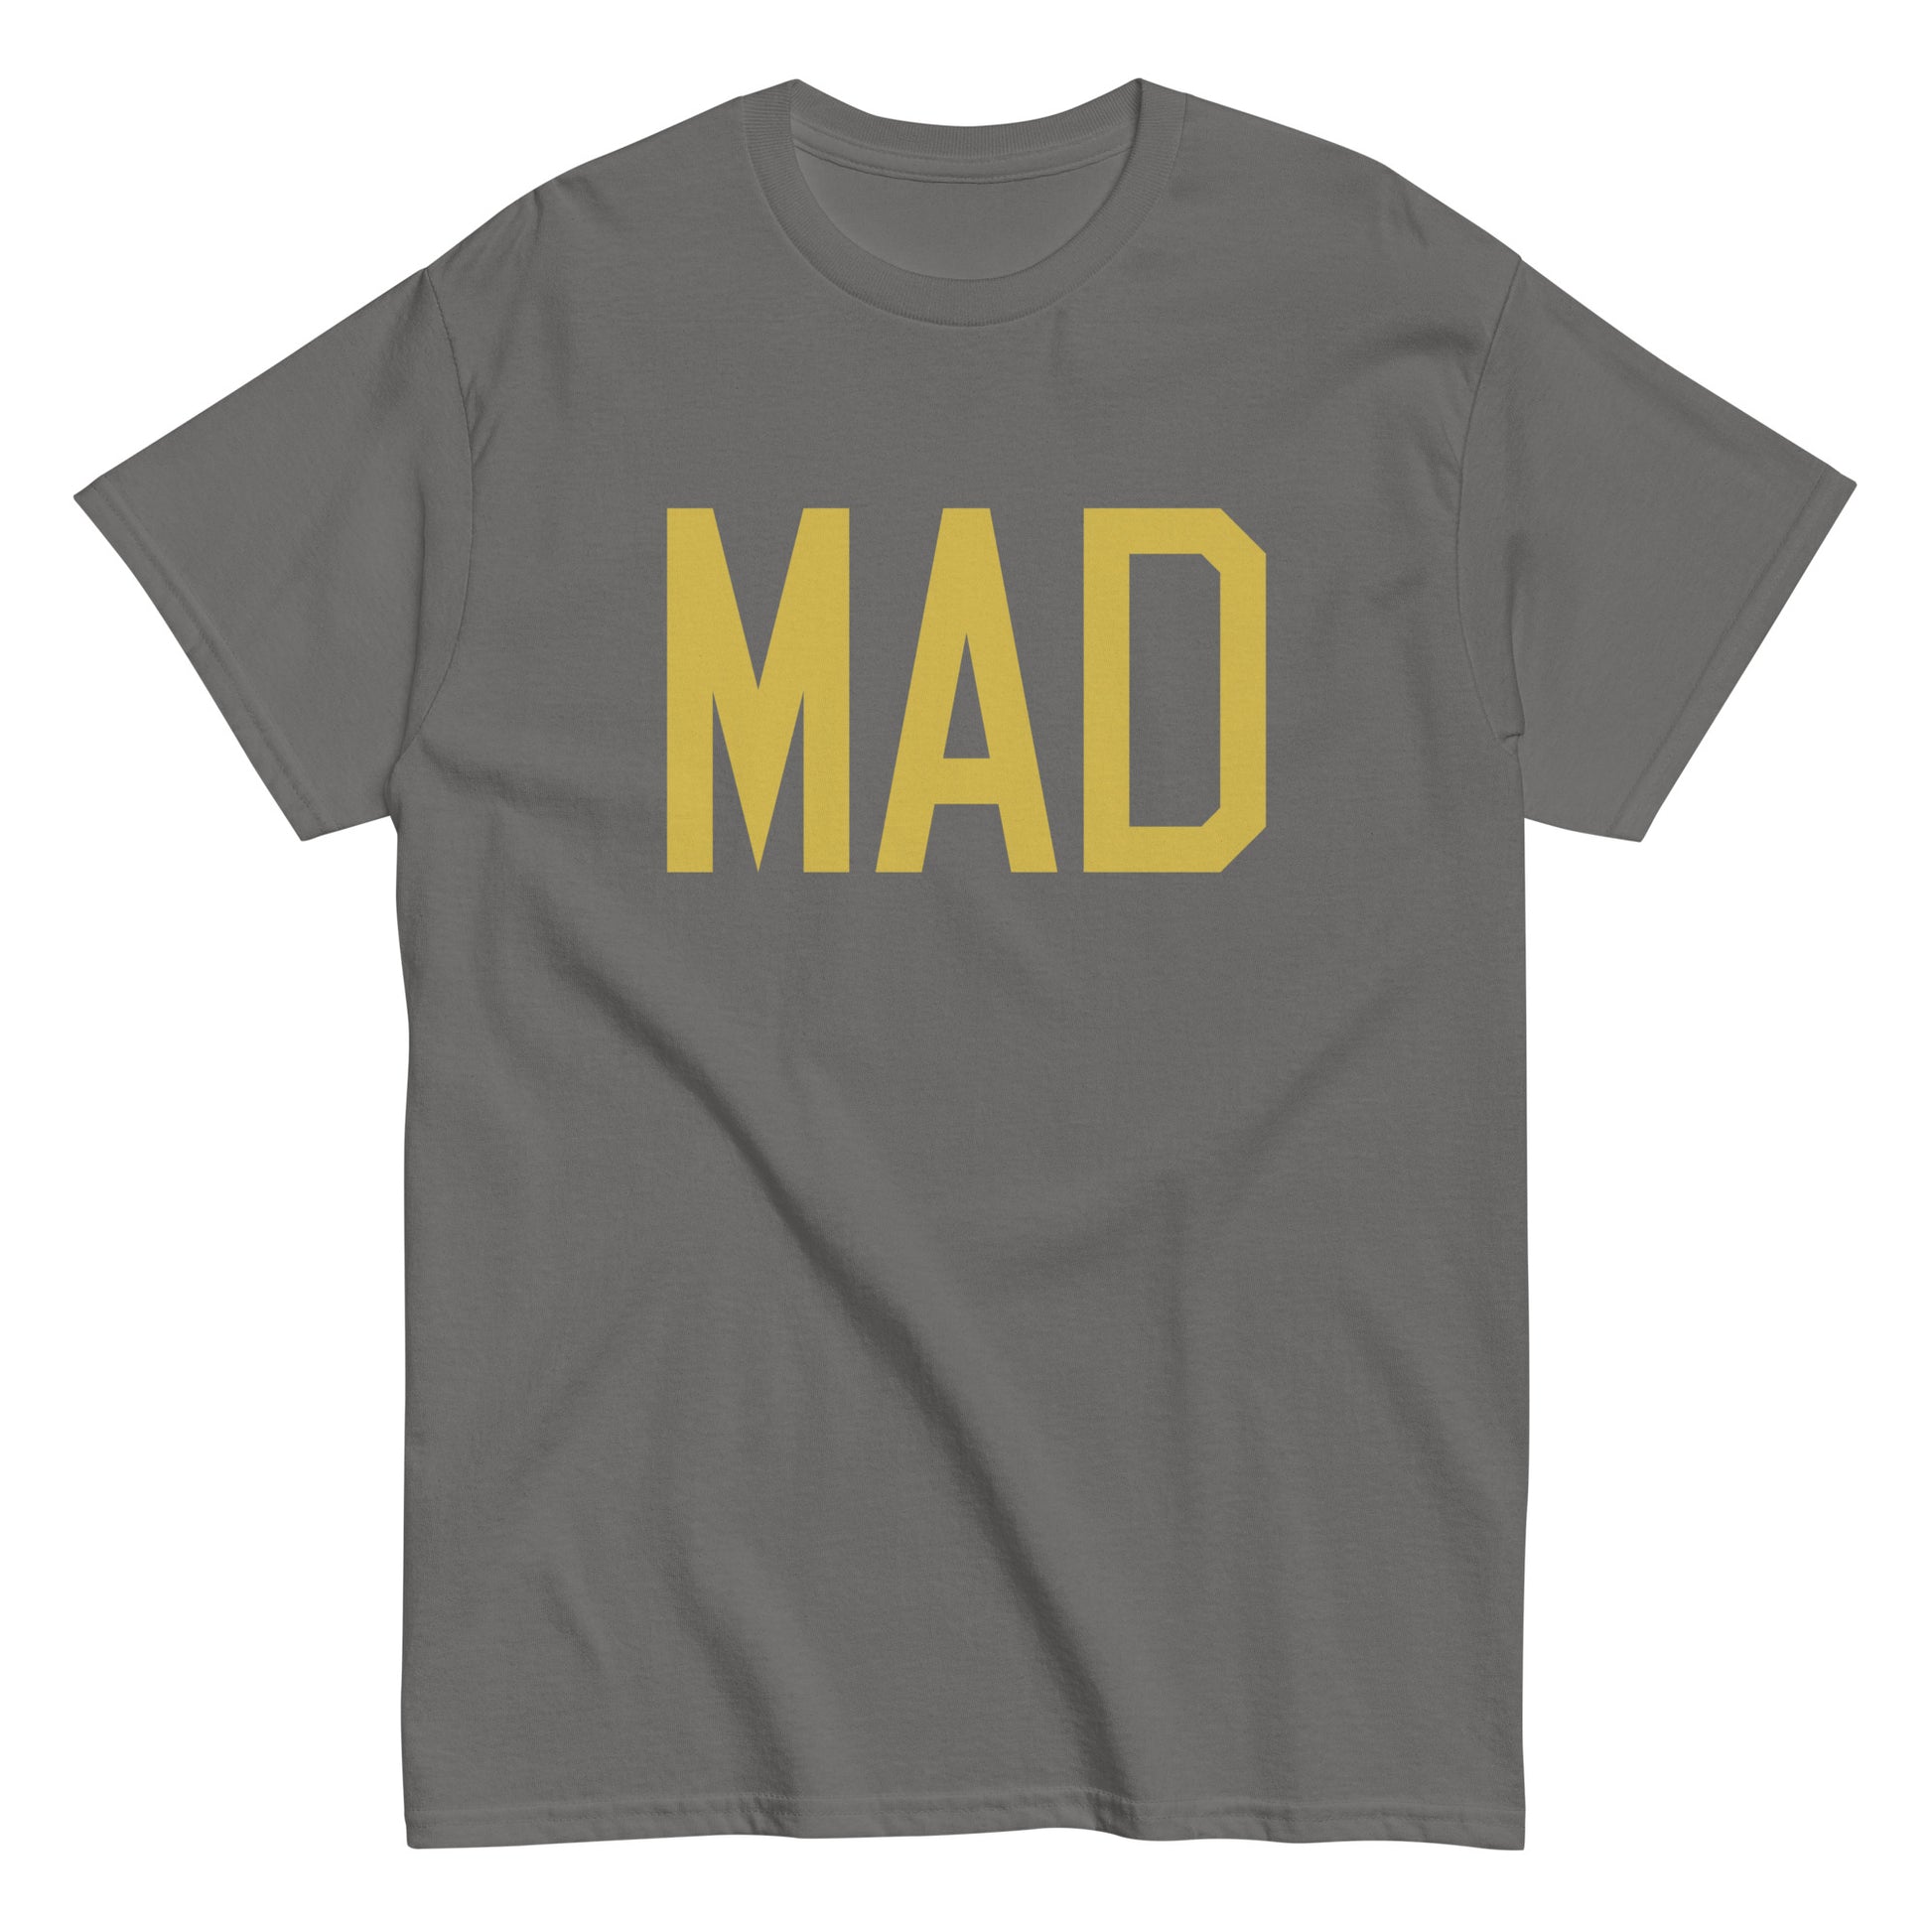 Aviation Enthusiast Men's Tee - Old Gold Graphic • MAD Madrid • YHM Designs - Image 01